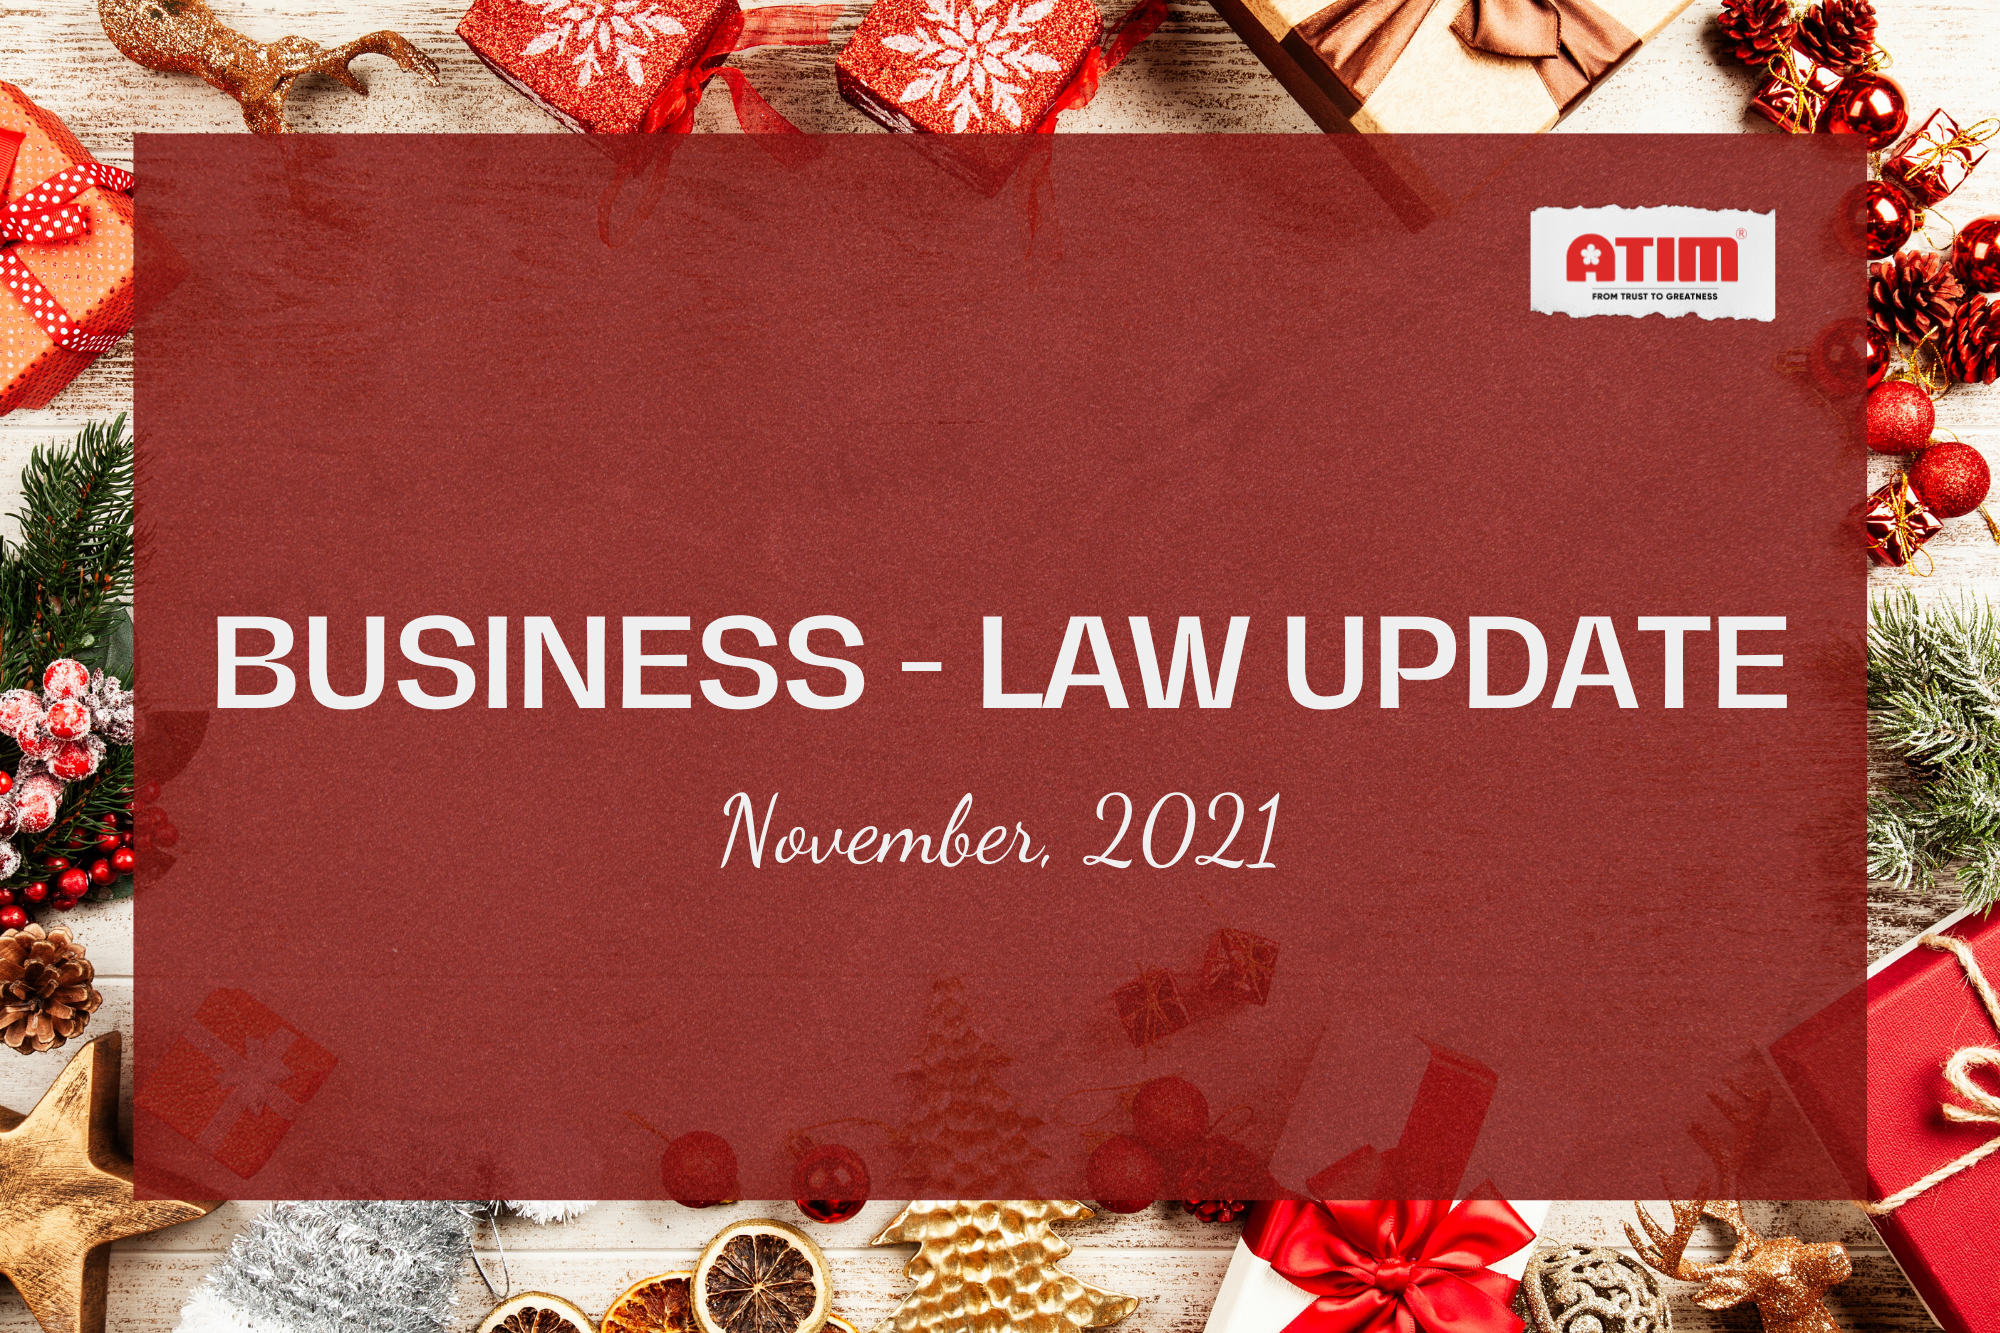 BUSINESS LAW UPDATE - NOVEMBER 2021